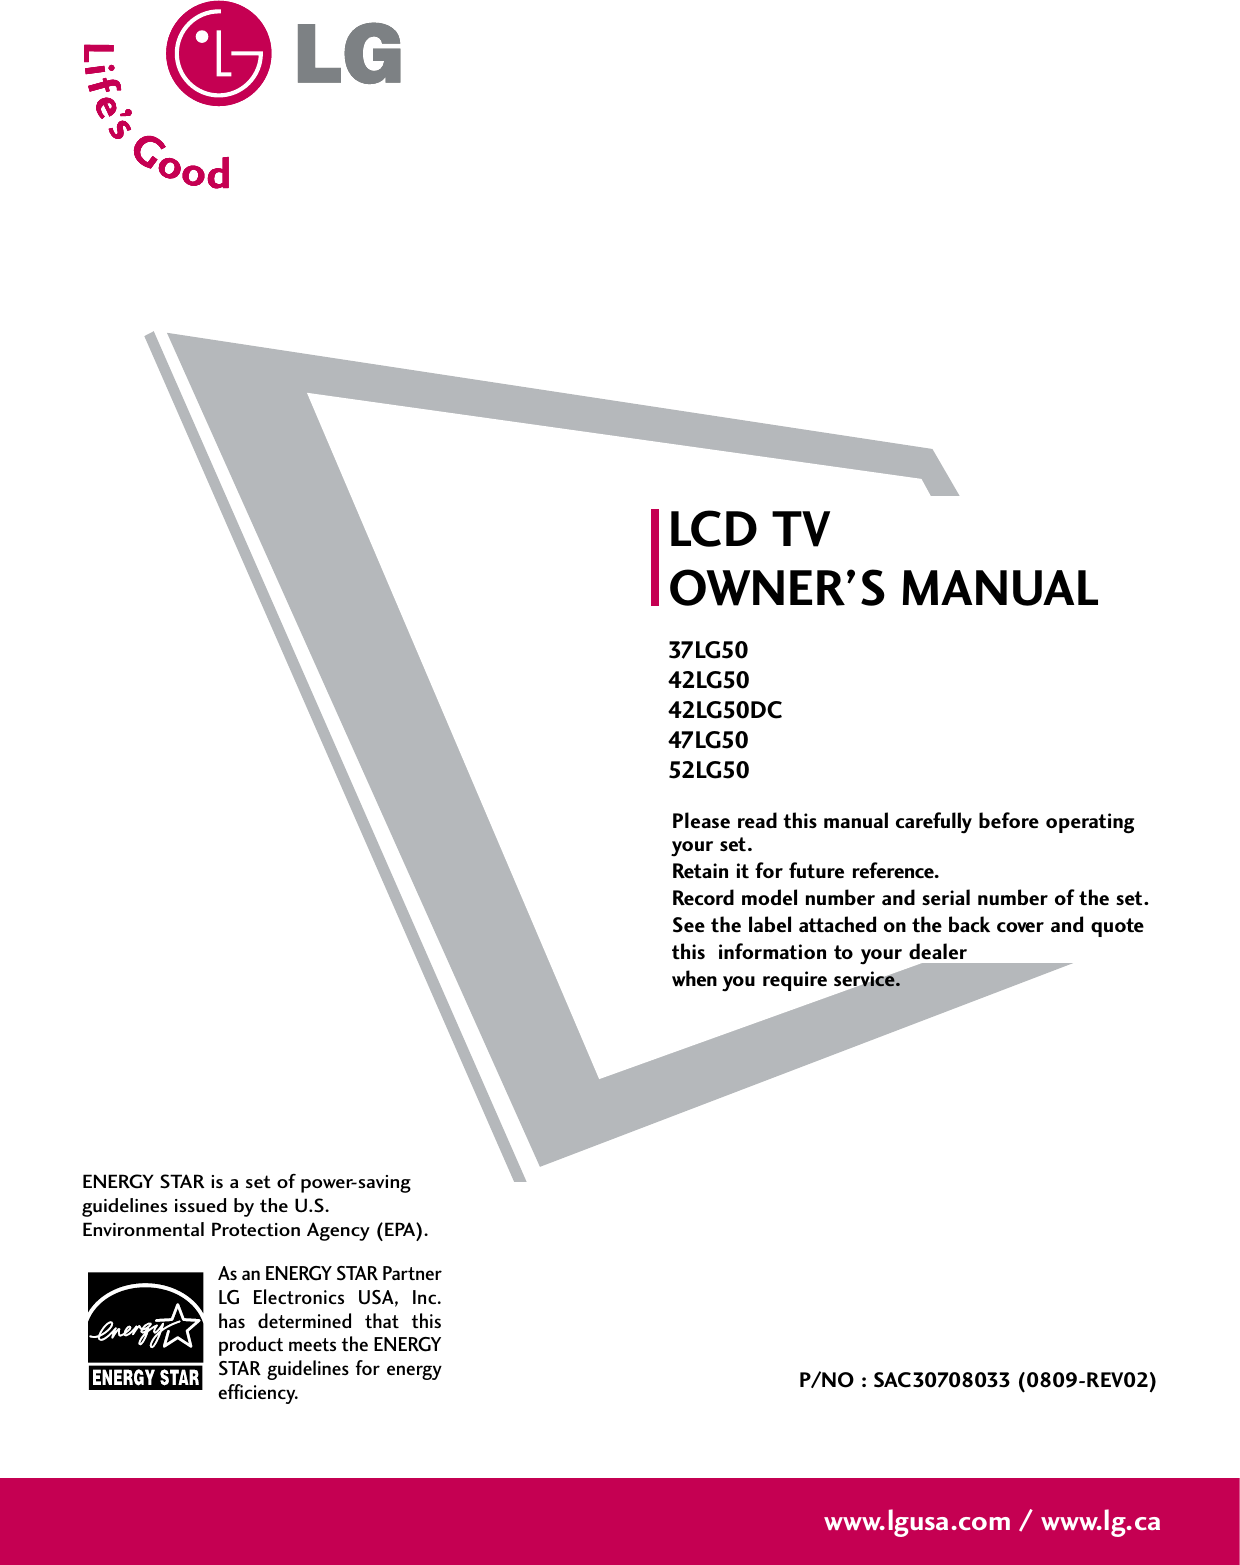 Please read this manual carefully before operatingyour set. Retain it for future reference.Record model number and serial number of the set. See the label attached on the back cover and quote this  information to your dealer when you require service.LCD TVOWNER’S MANUAL37LG5042LG5042LG50DC47LG5052LG50P/NO : SAC30708033 (0809-REV02)www.lgusa.com / www.lg.caAs an ENERGY STAR PartnerLG  Electronics  USA,  Inc.has  determined  that  thisproduct meets the ENERGYSTAR guidelines for energyefficiency.ENERGY STAR is a set of power-savingguidelines issued by the U.S.Environmental Protection Agency (EPA).